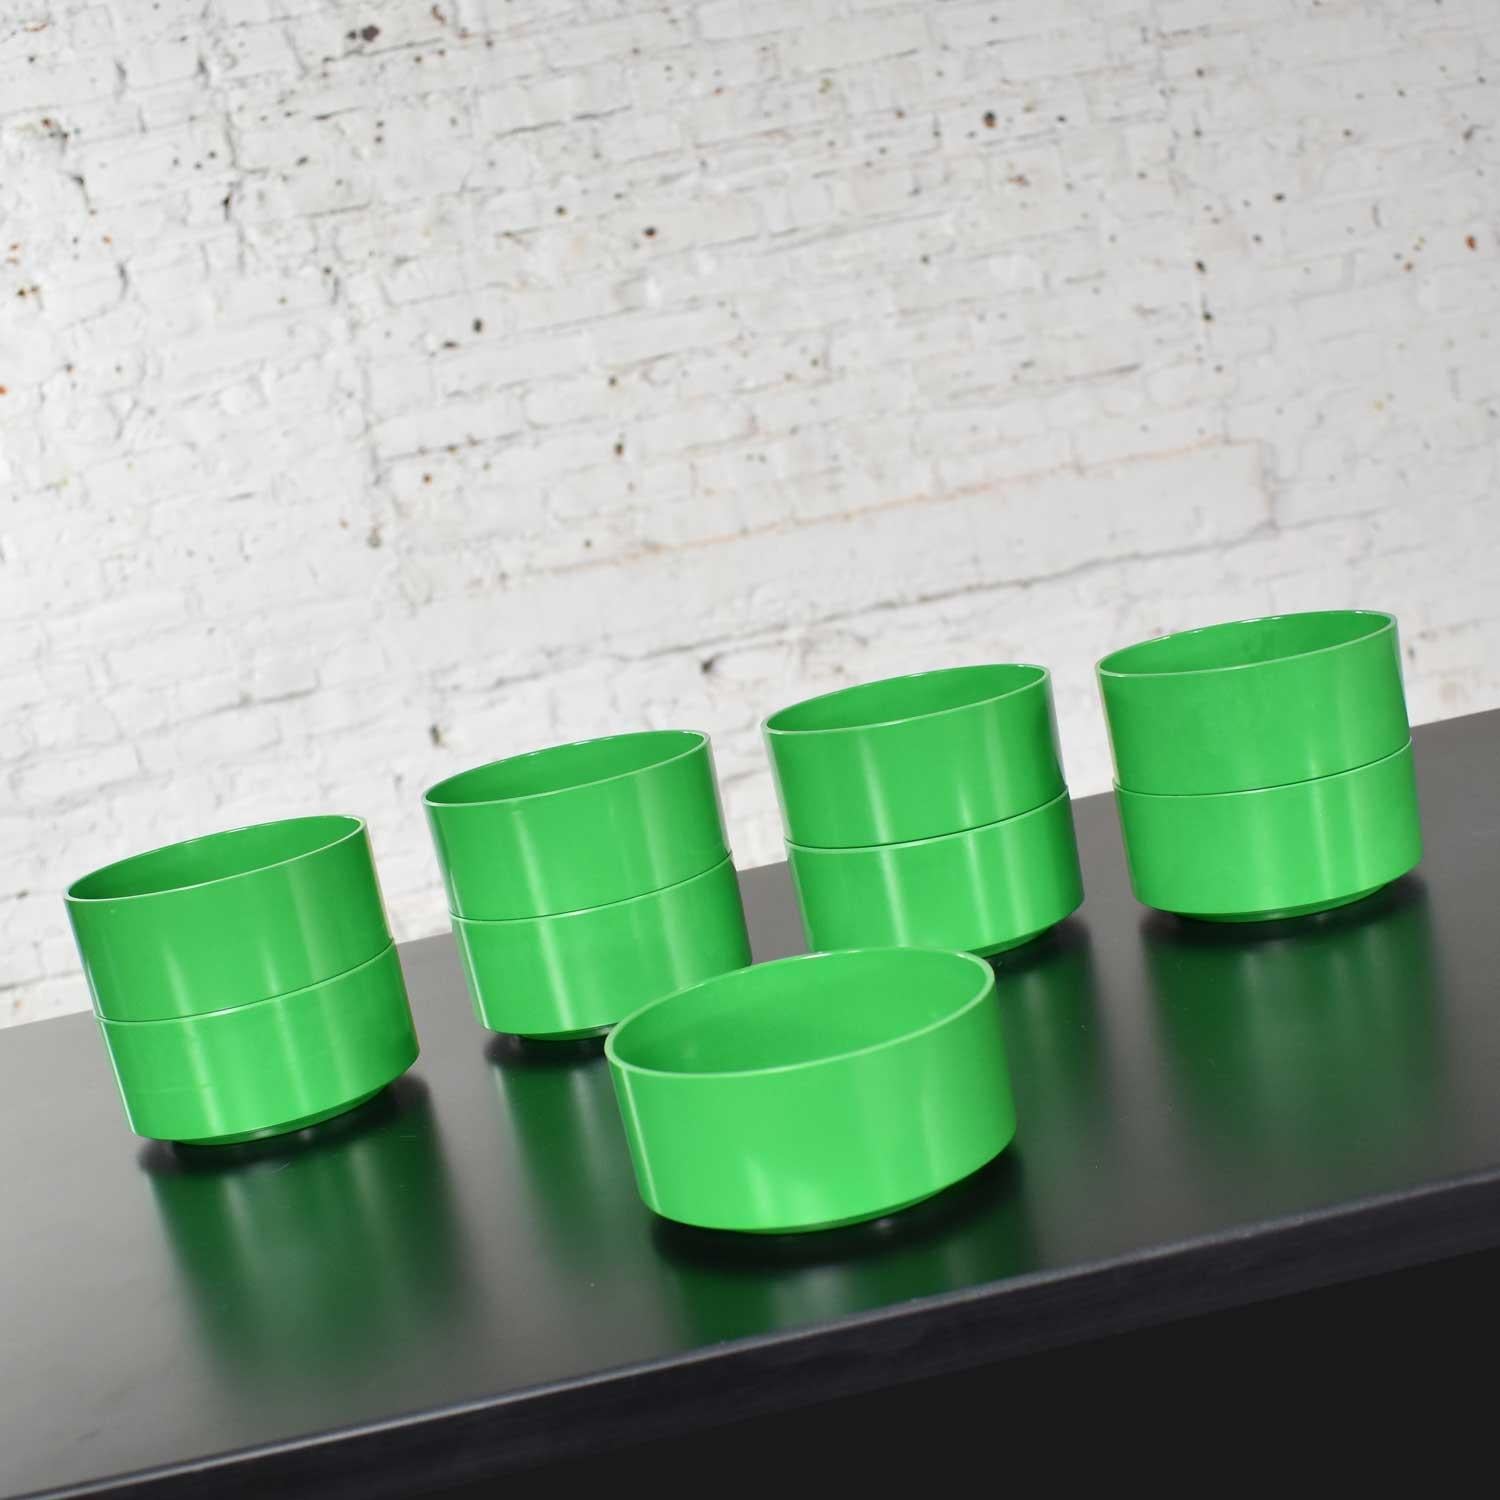 Heller Dinnerware by Lella & Massimo Vignelli in Kelly Green 58 Pieces & Napkins 1